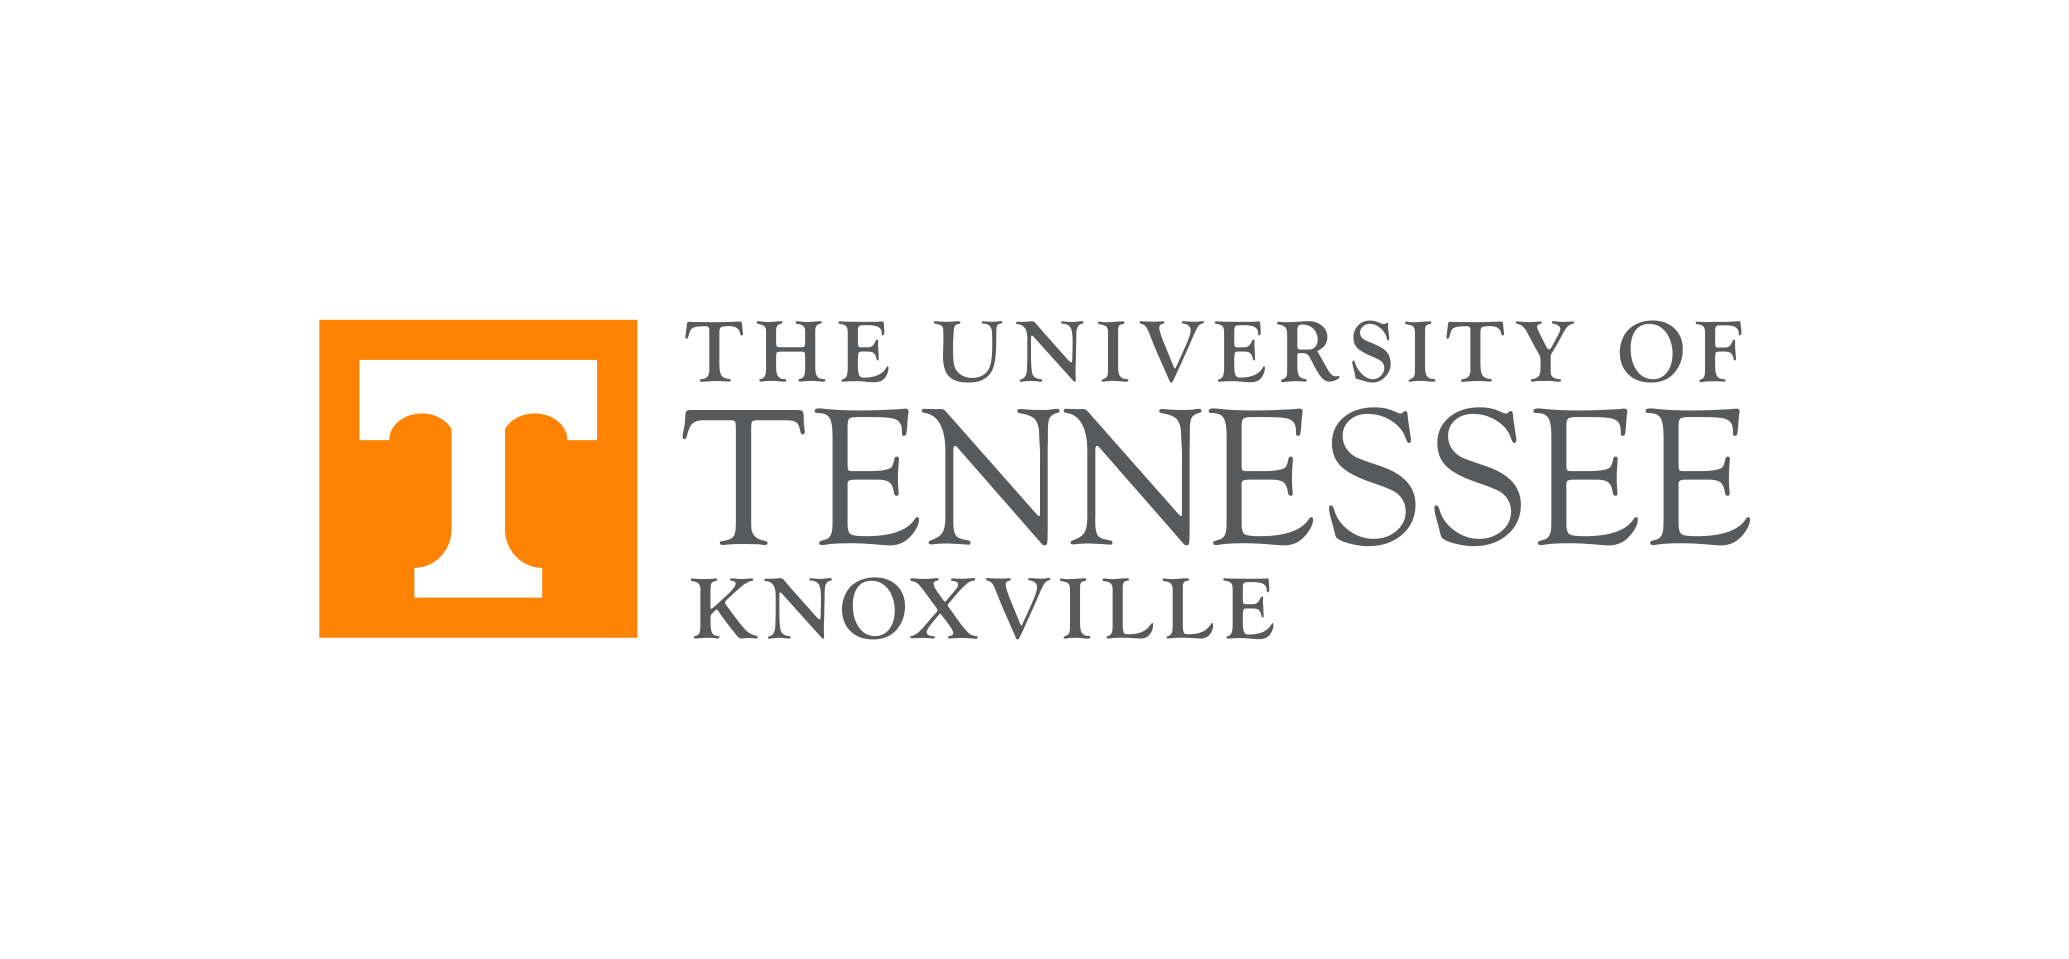 The University of Tennessee - Knoxville